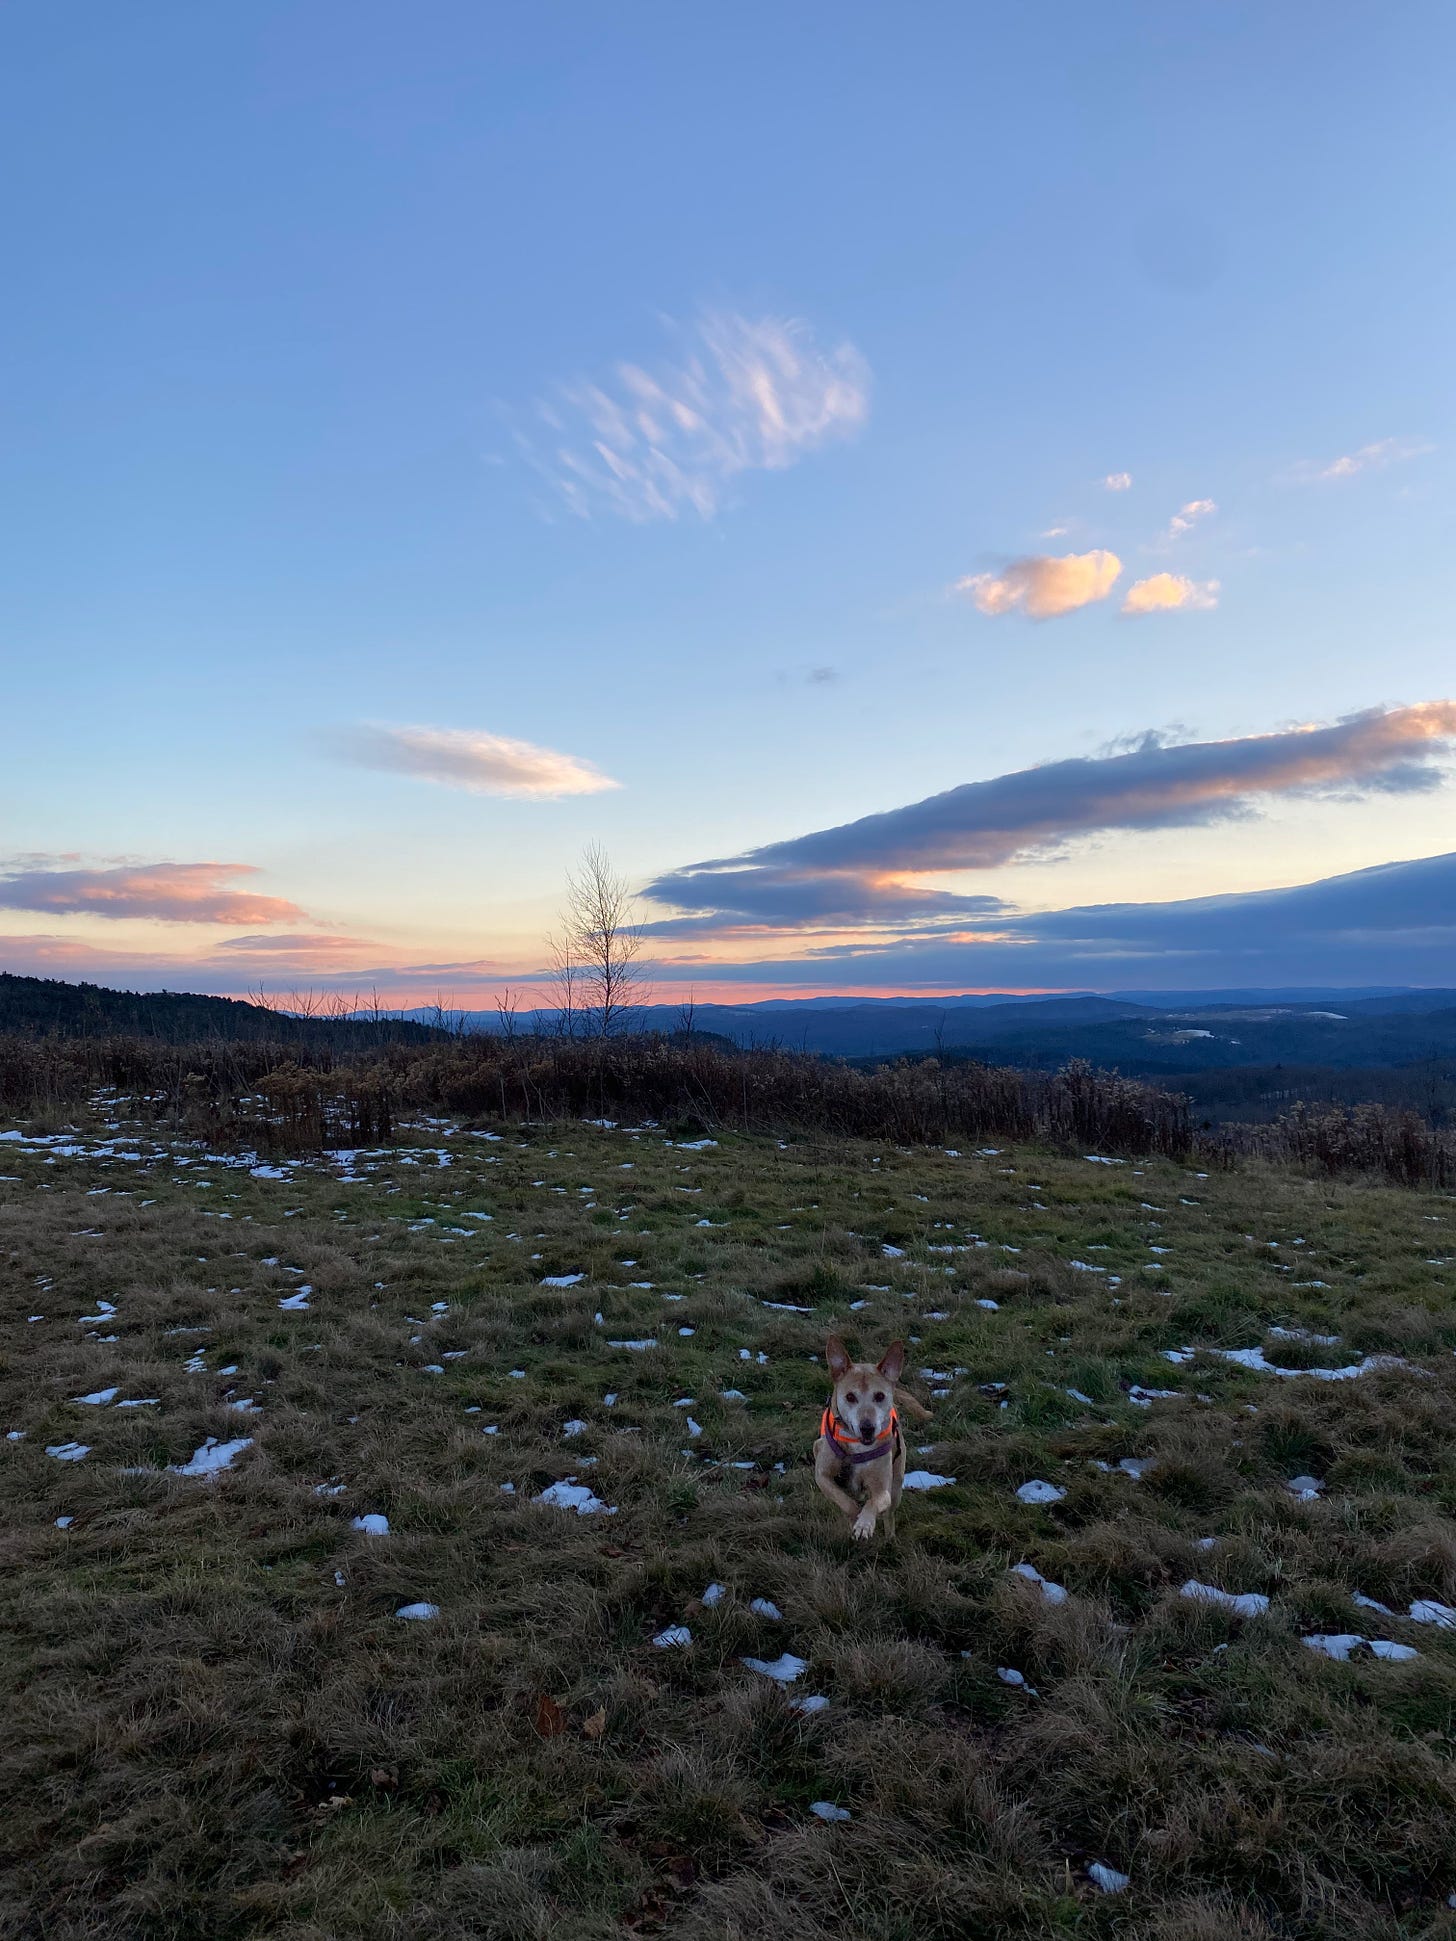 Nessa bounding on the ridge at sunset. The sky is pink and purple. Her front paws are lifted off the ground and her ears are perked.